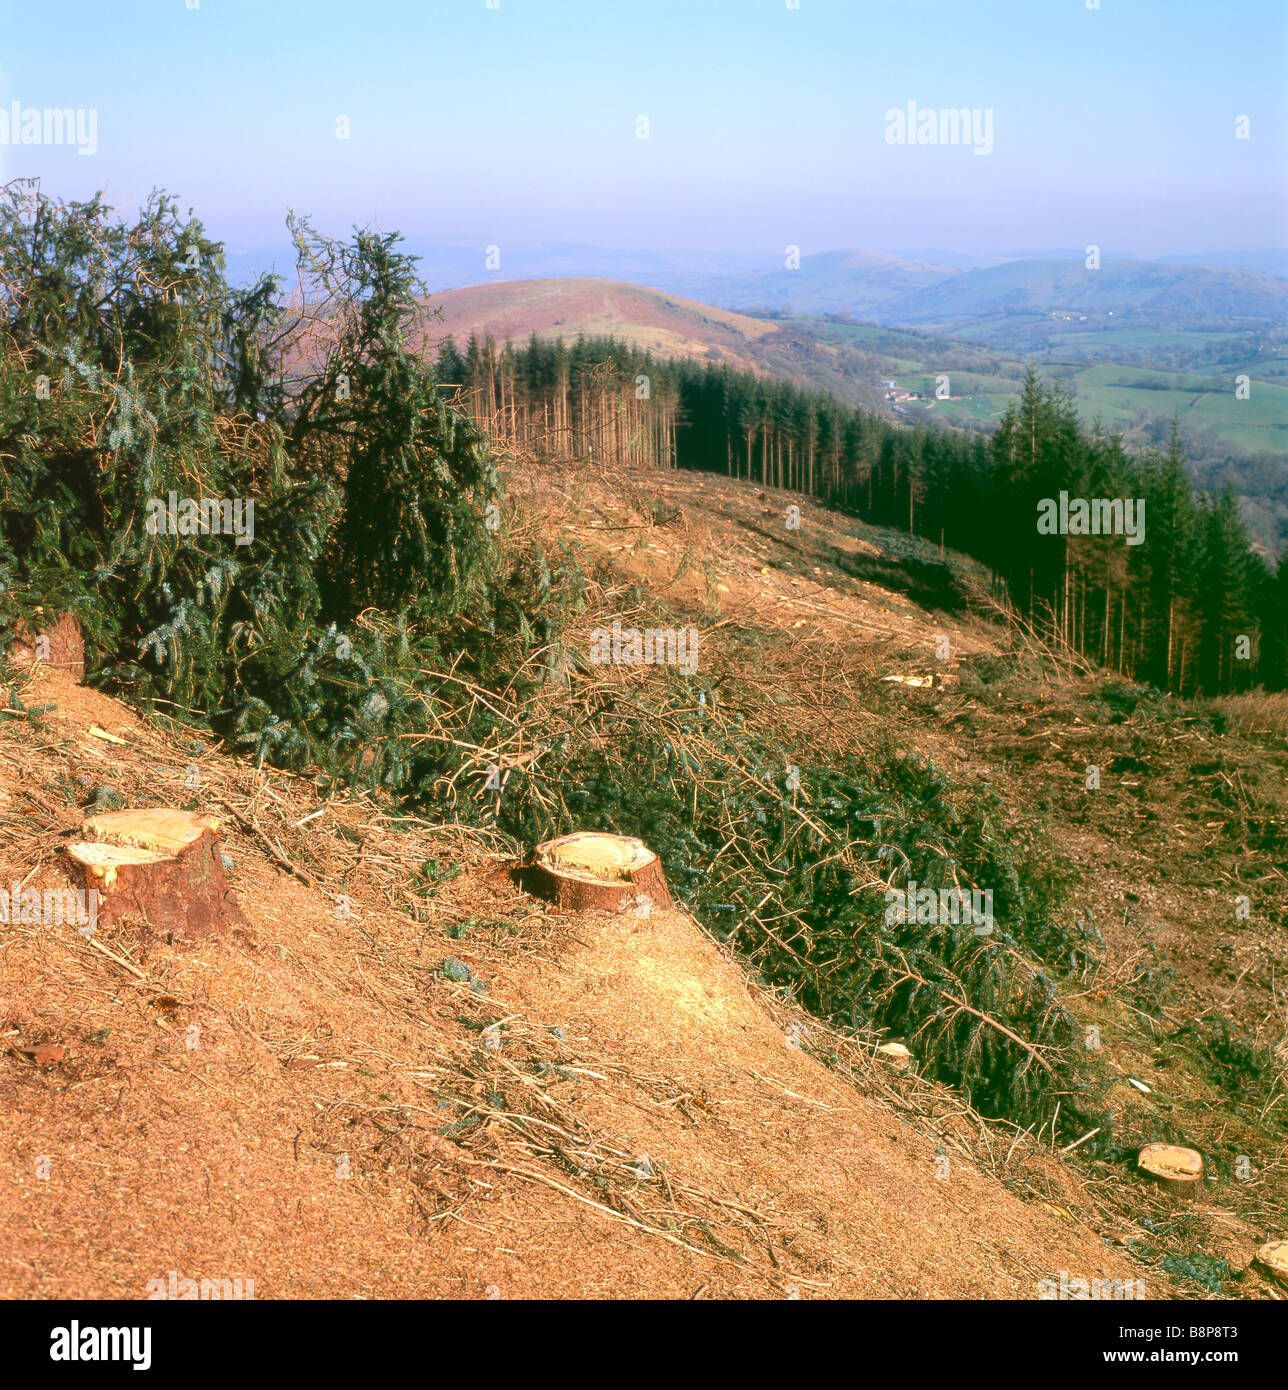 Forestry site landscape plantation after a forest of conifer trees conifers have been cut down and cleared in Carmarthenshire Wales UK  KATHY DEWITT Stock Photo